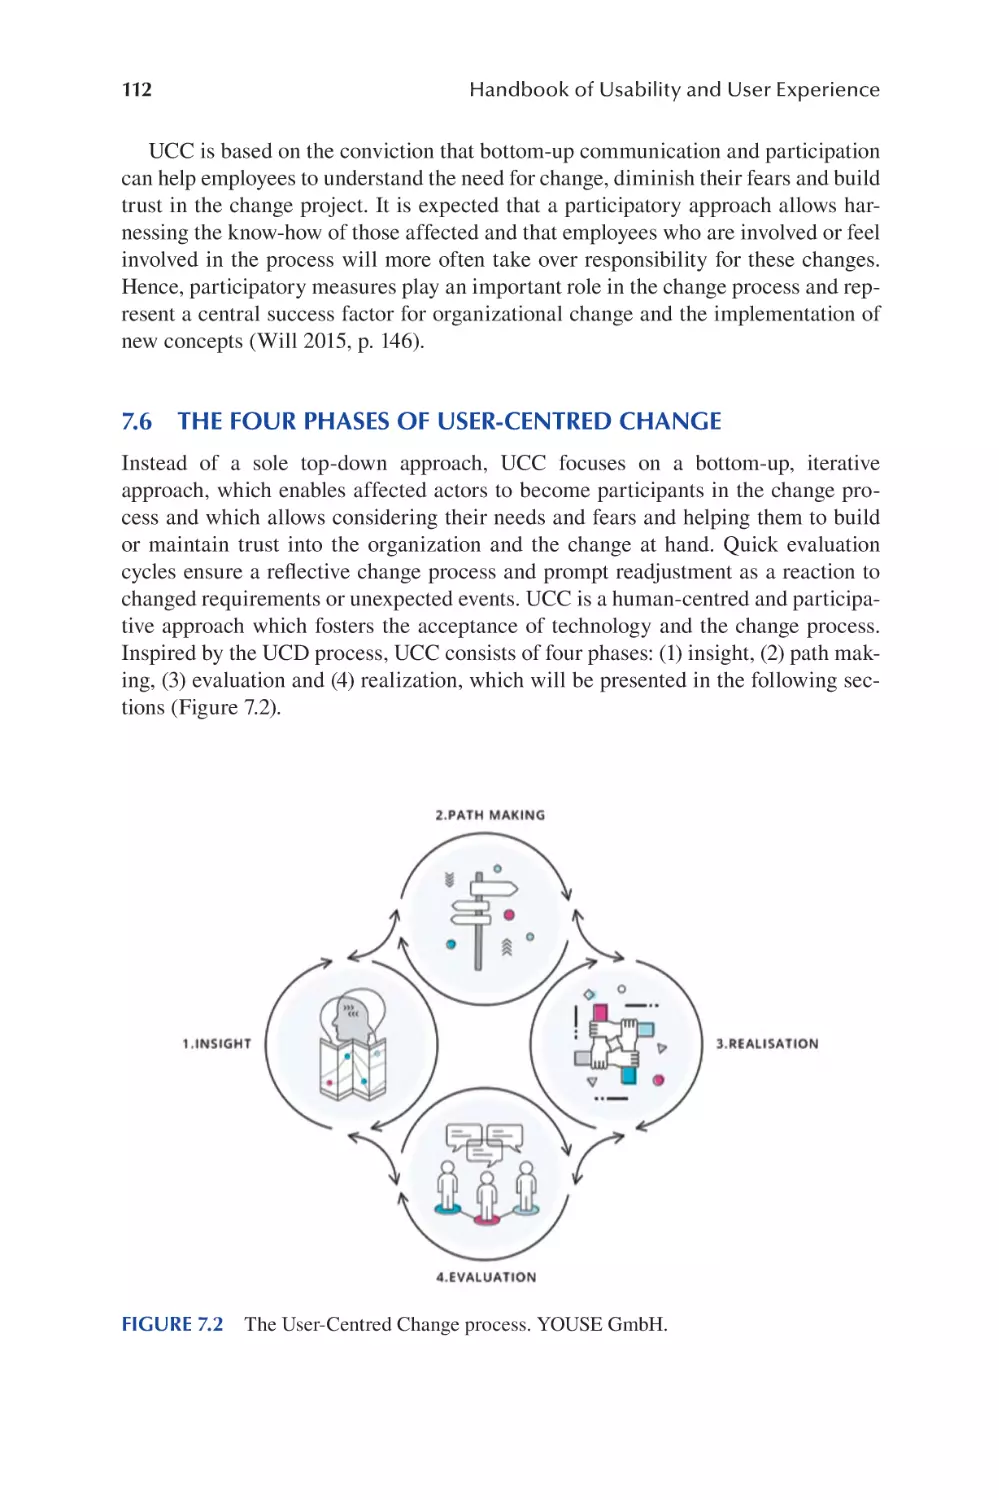 7.6 The Four Phases of User-Centred Change